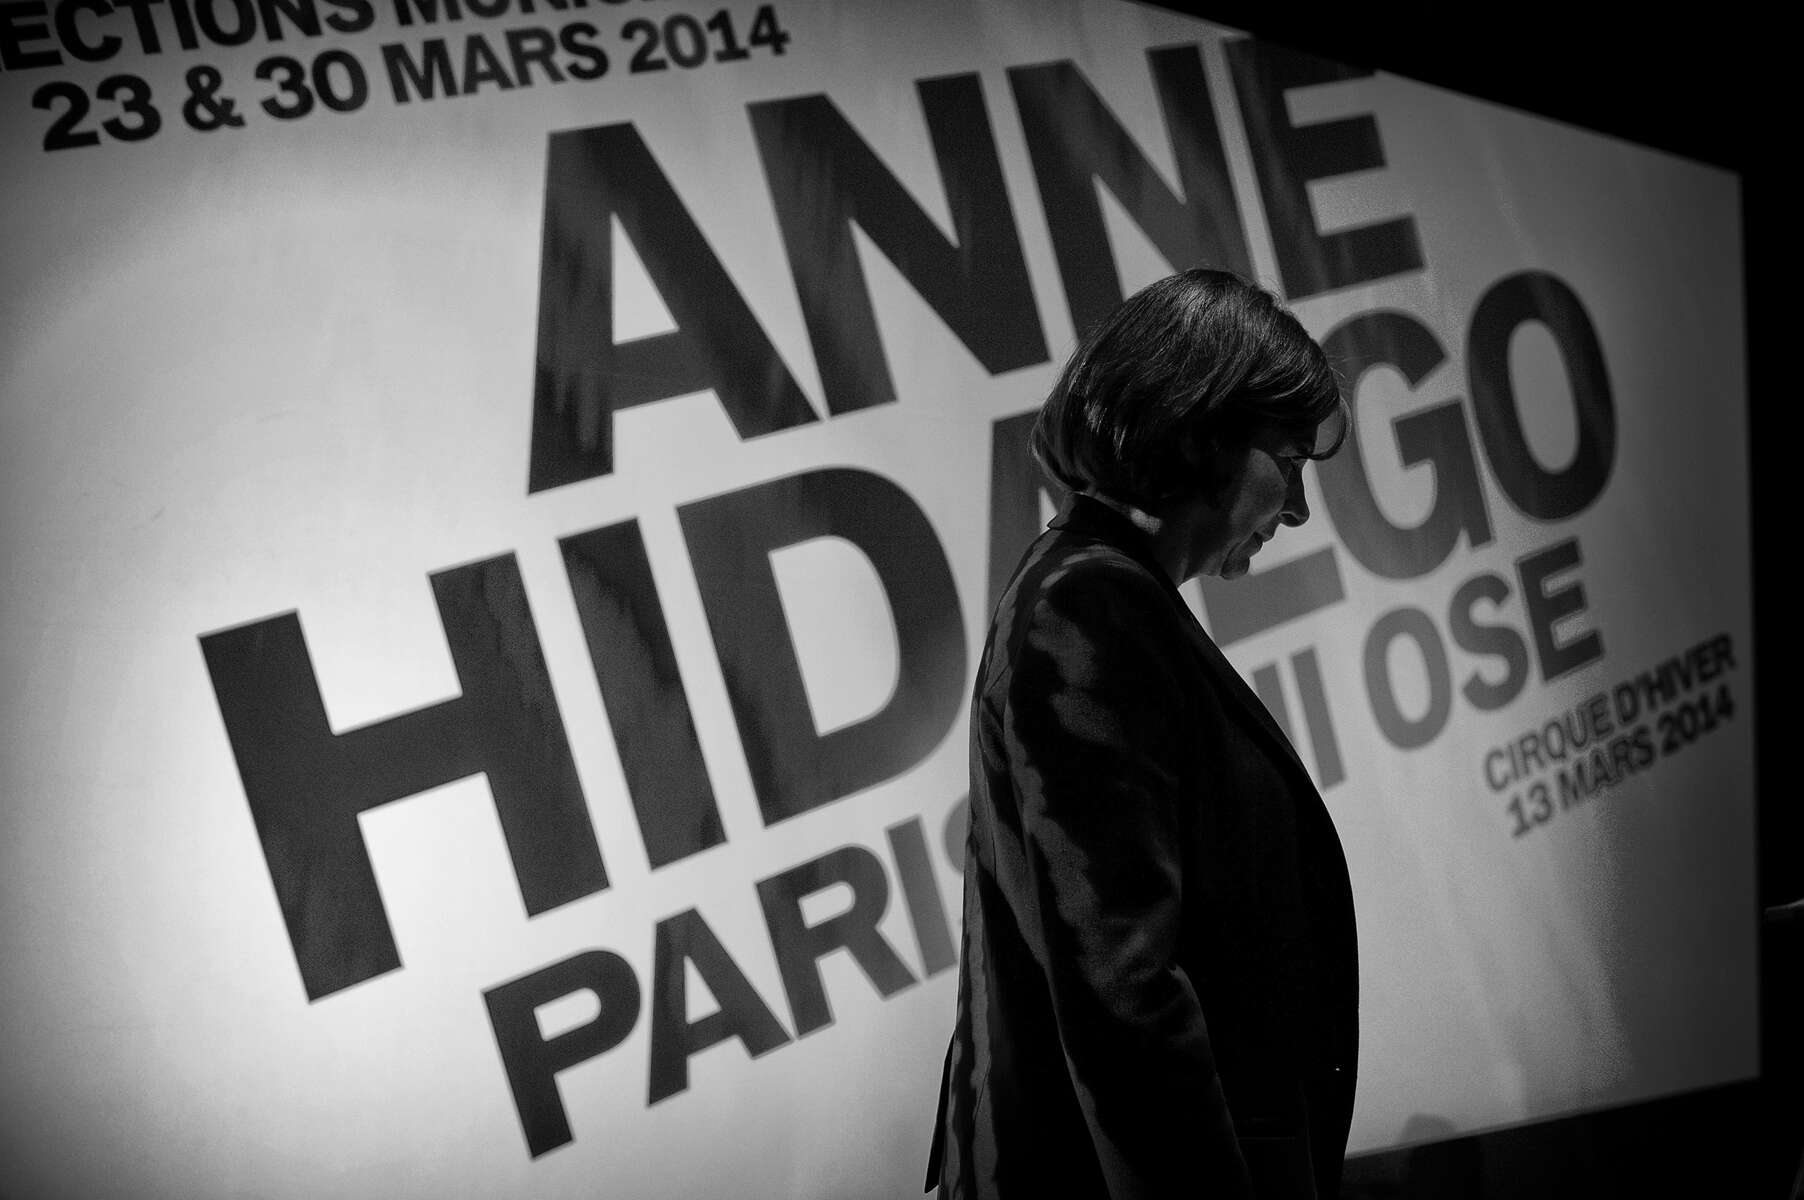 March 13, 2014.  PARIS, FRANCE- Mayoral candidate Anne Hidalgo does a technical run through before her big rally at Paris' historic Cirque d'Hiver.  For the first time in France's history, Paris will have a woman as a mayor - either Socialist Anne Hidalgo or Center-Right Nathalie Kosciusko-Morizet.  Photo by Scout Tufankjian